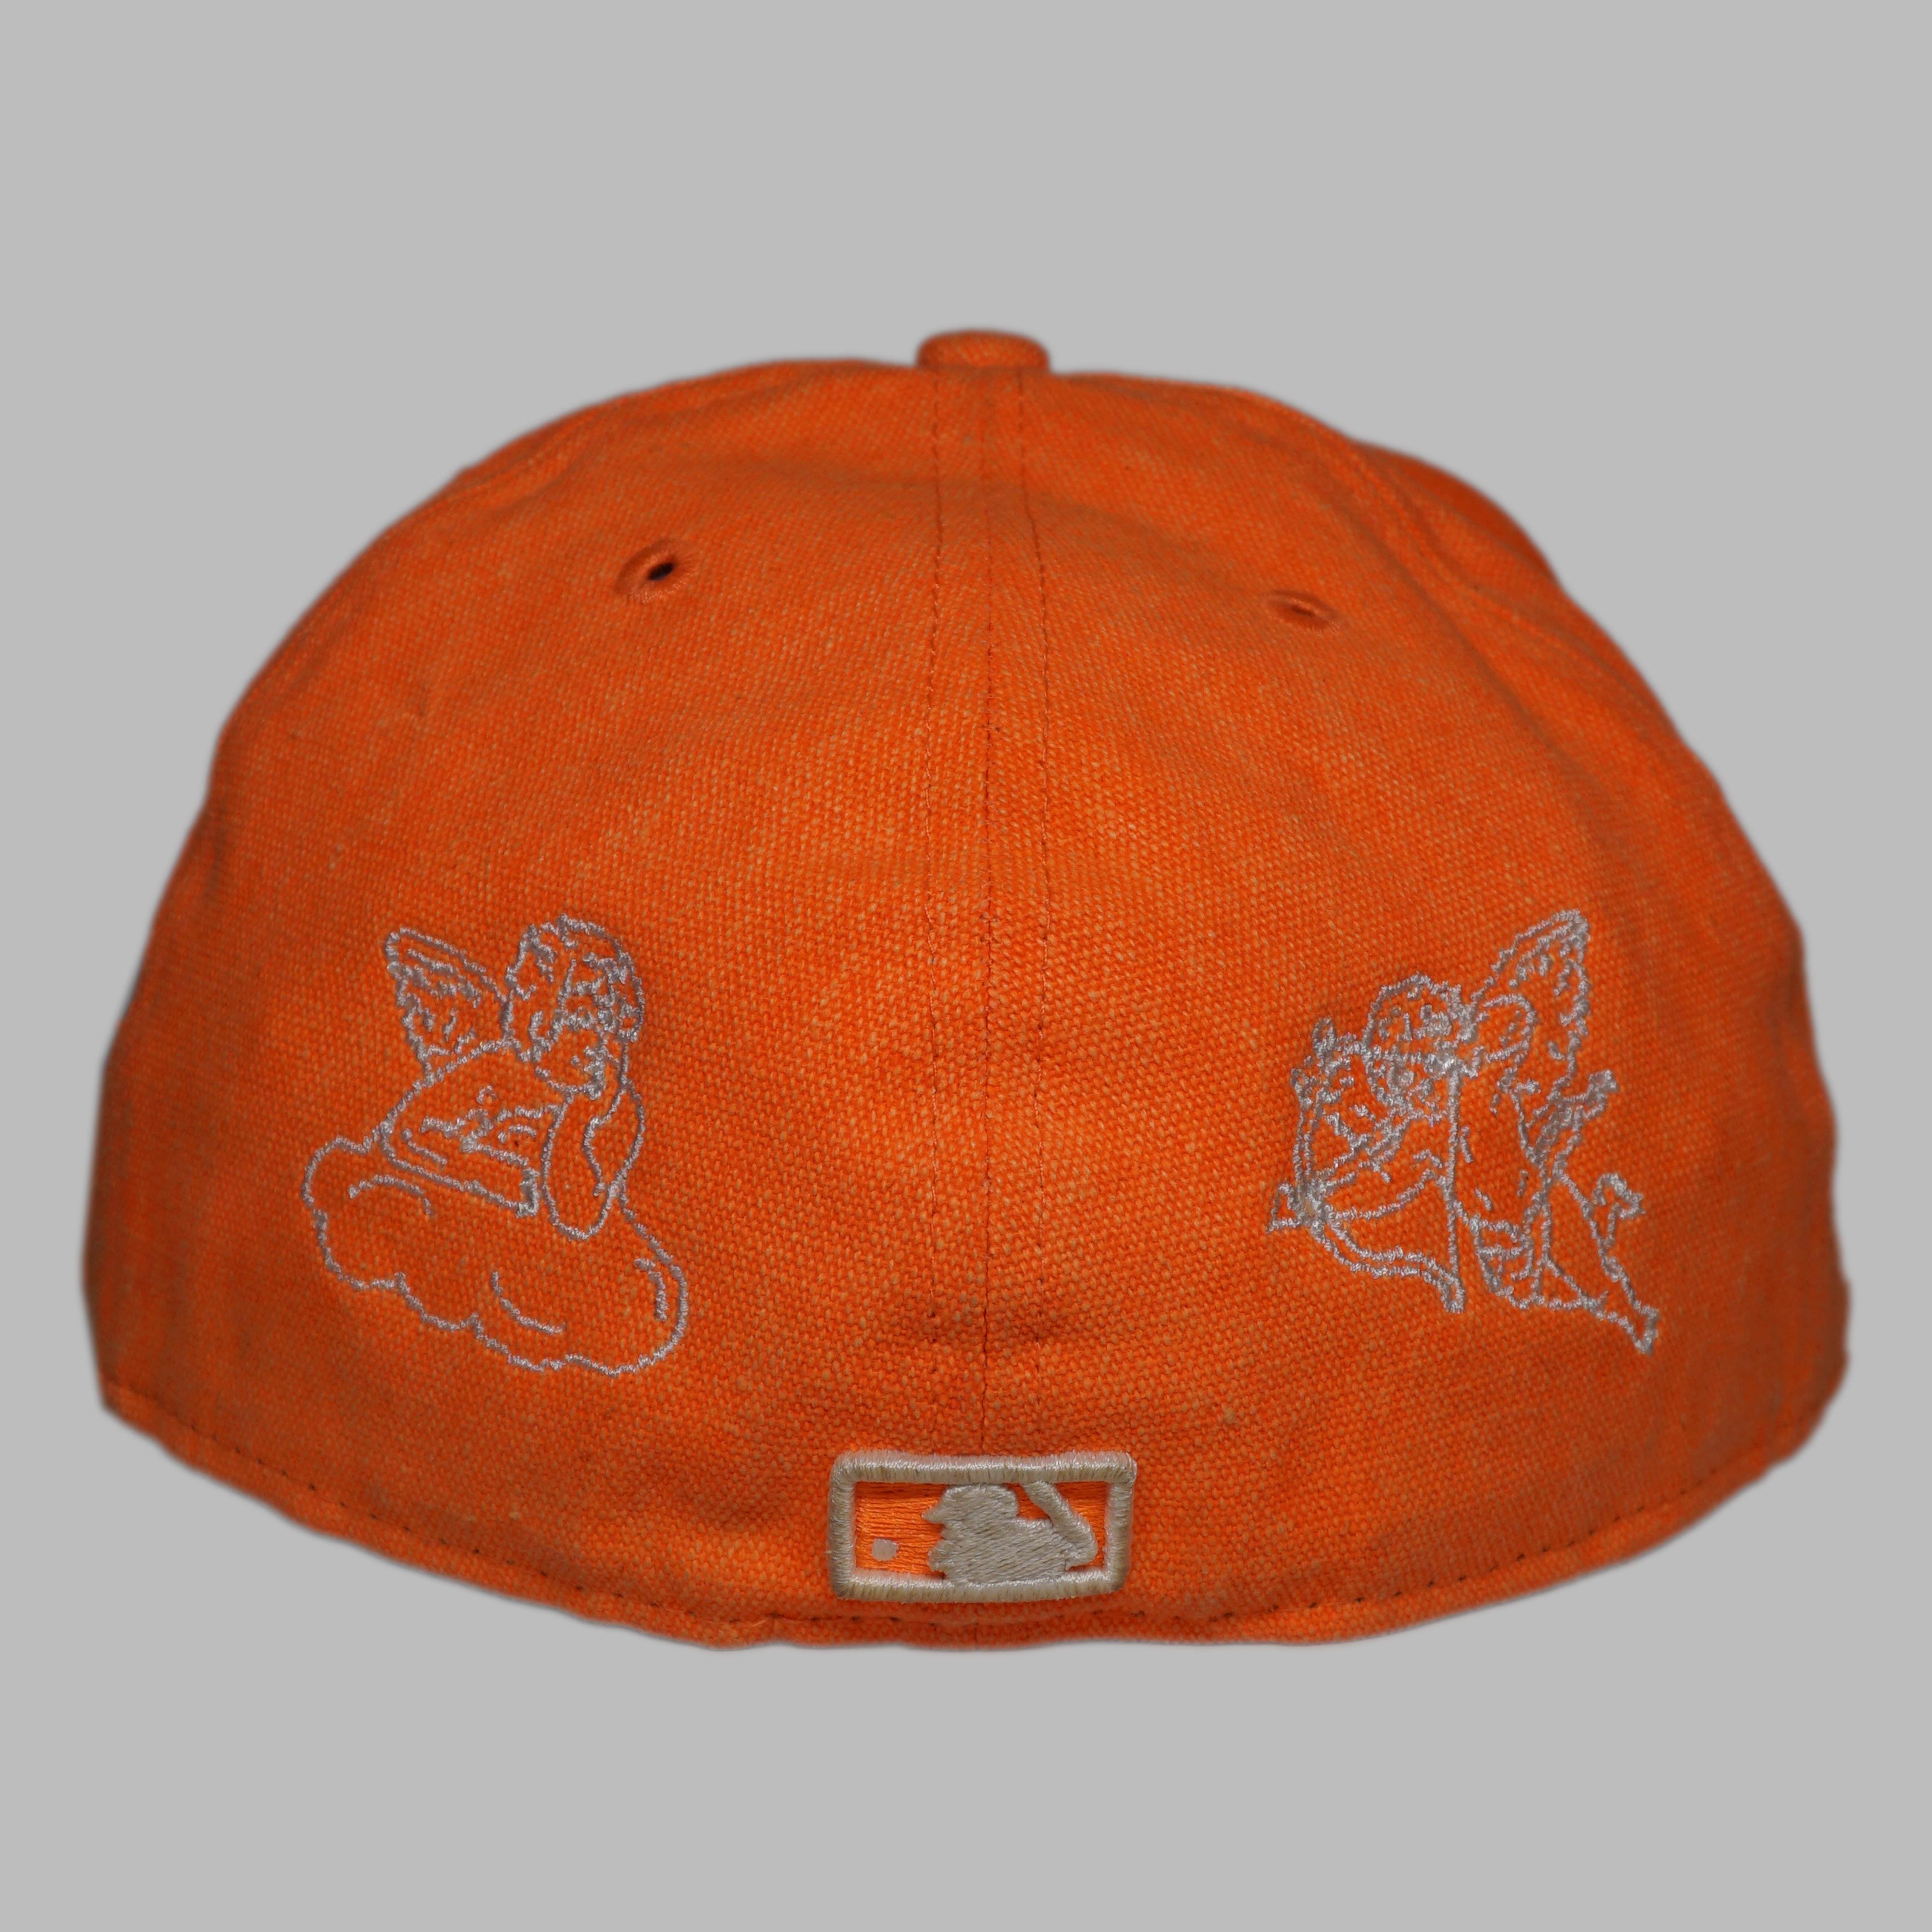 ORANGE HOLY FITTED (size 7 1/2)